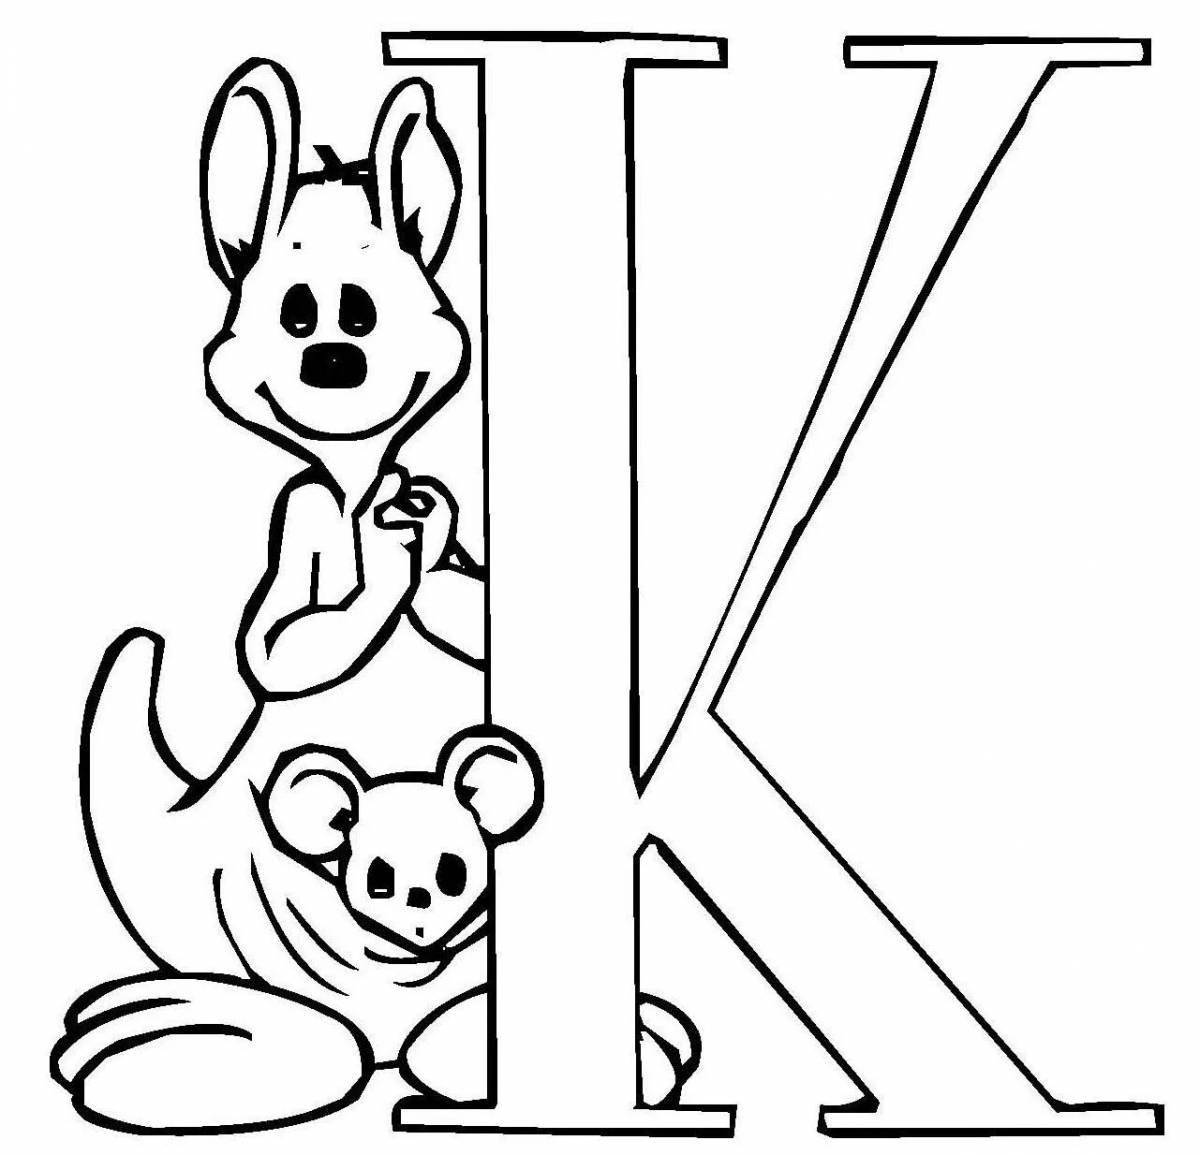 Coloring majestic letter k